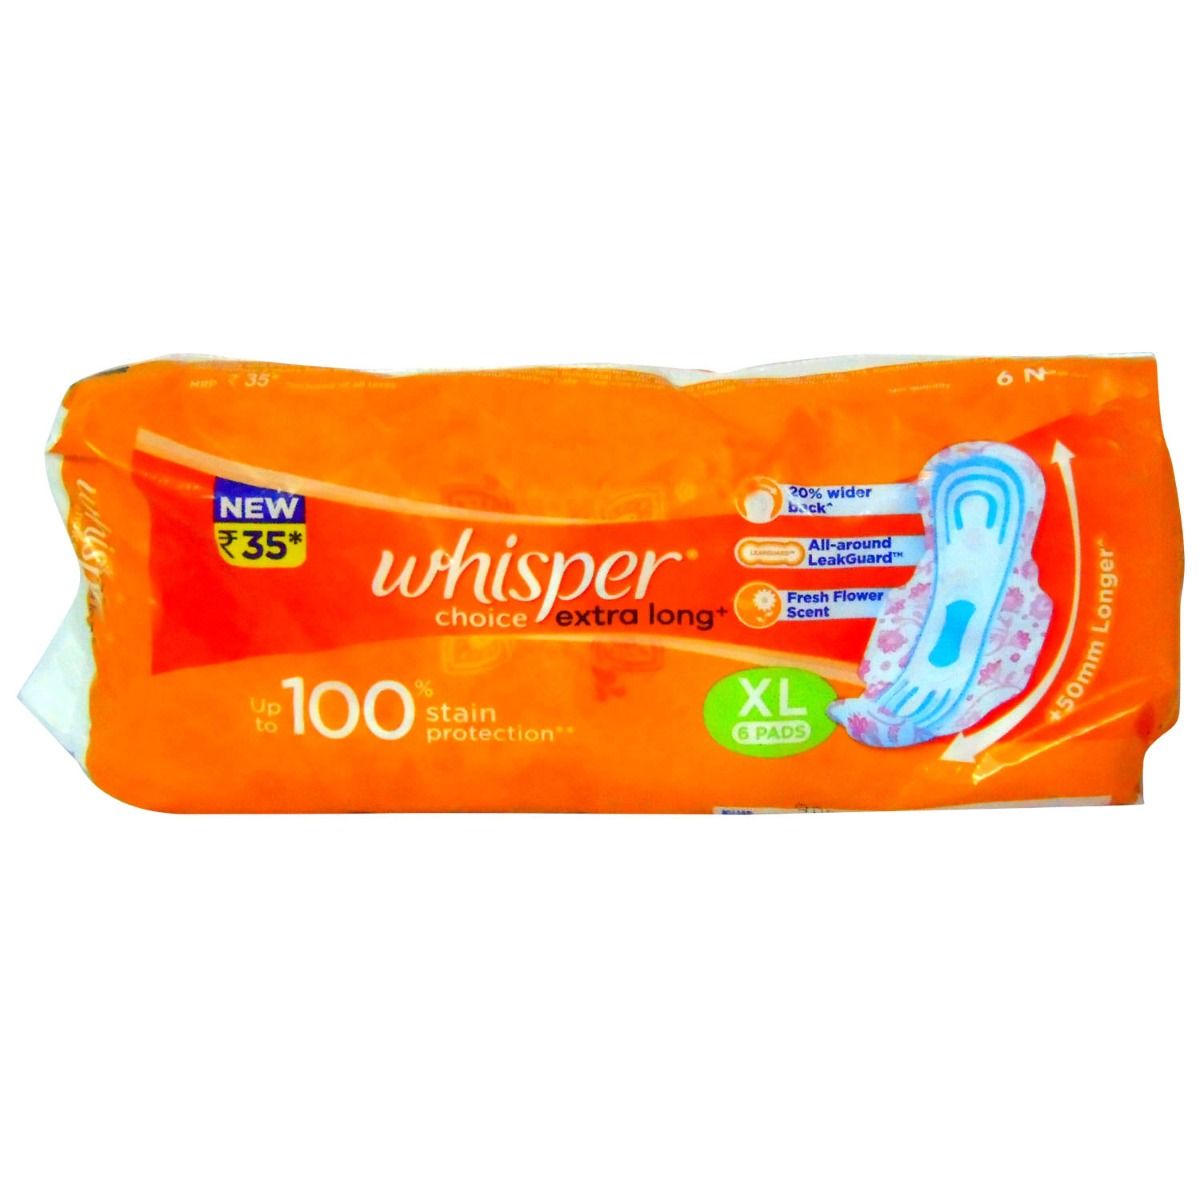 Whisper Choice Wings Sanitary Pads XL, 6 Count, Pack of 1 